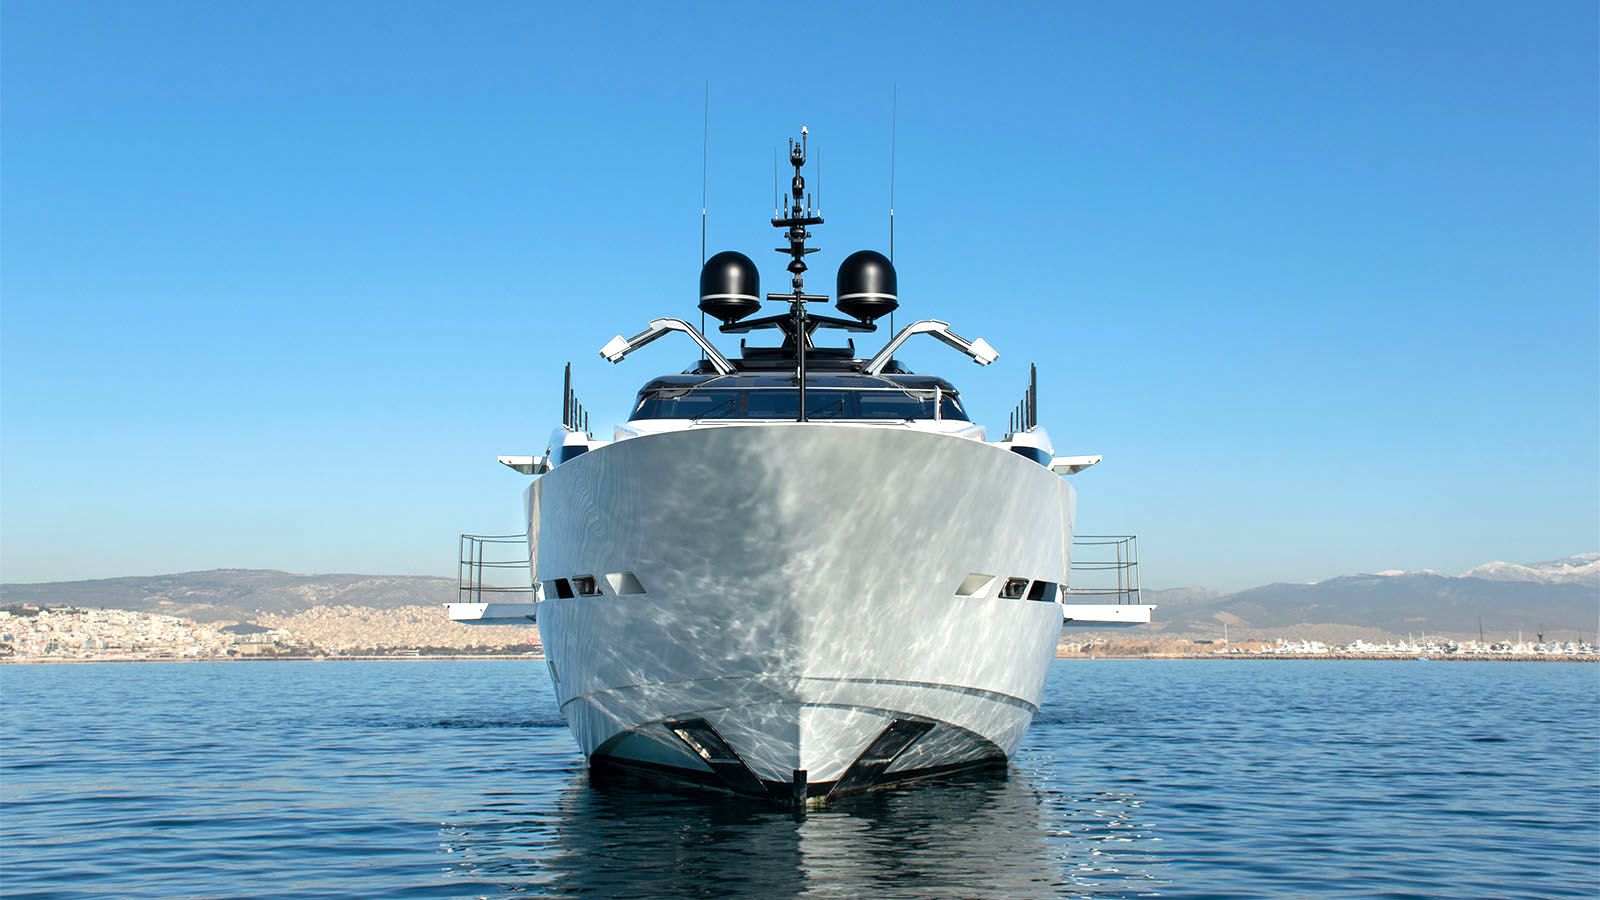 different types of motor yachts